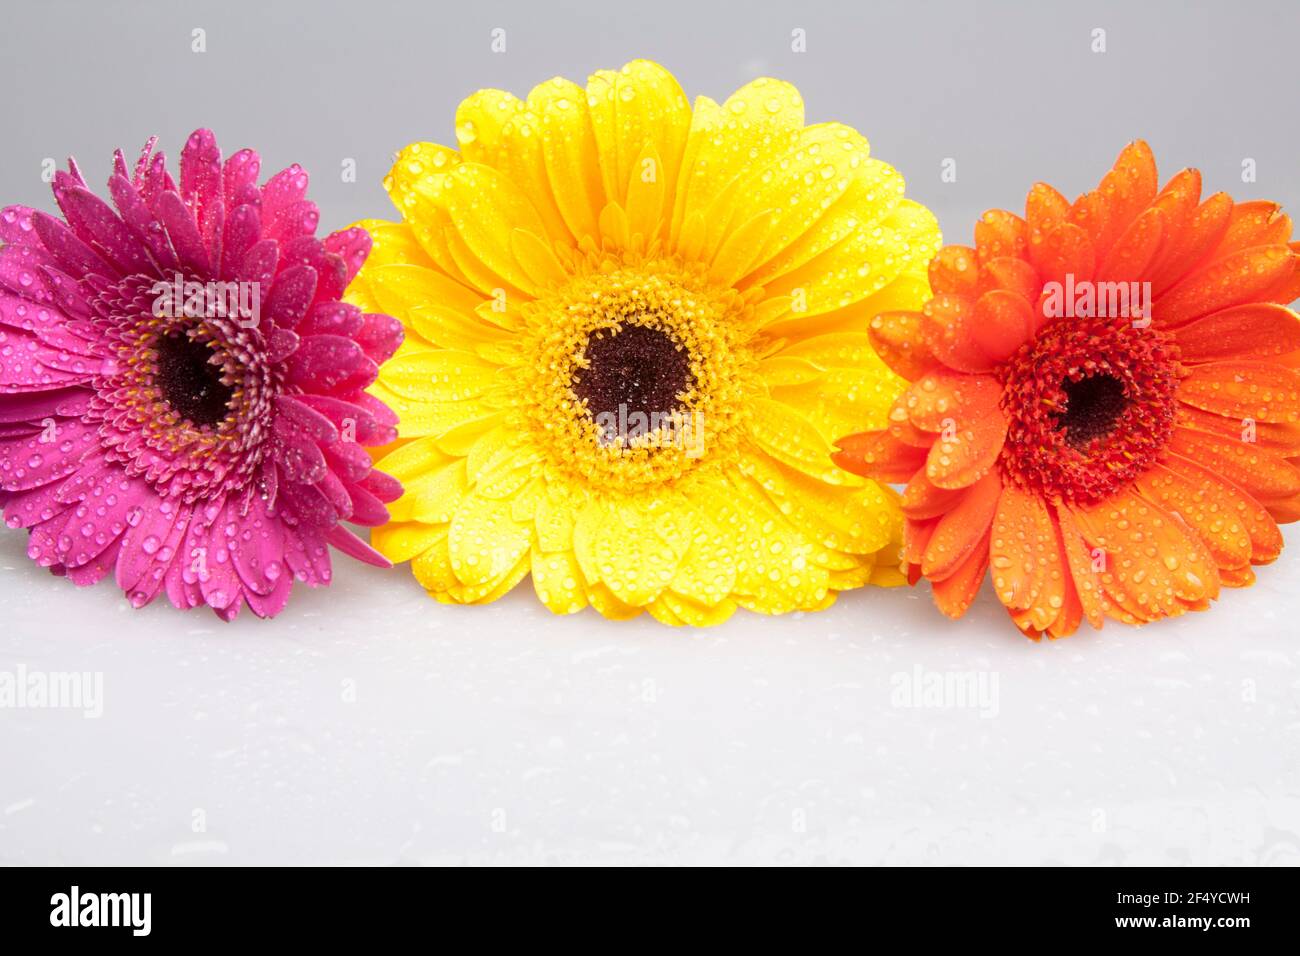 3 Vibrant colourful gerbera daisies upclose isolated on white background Stock Photo